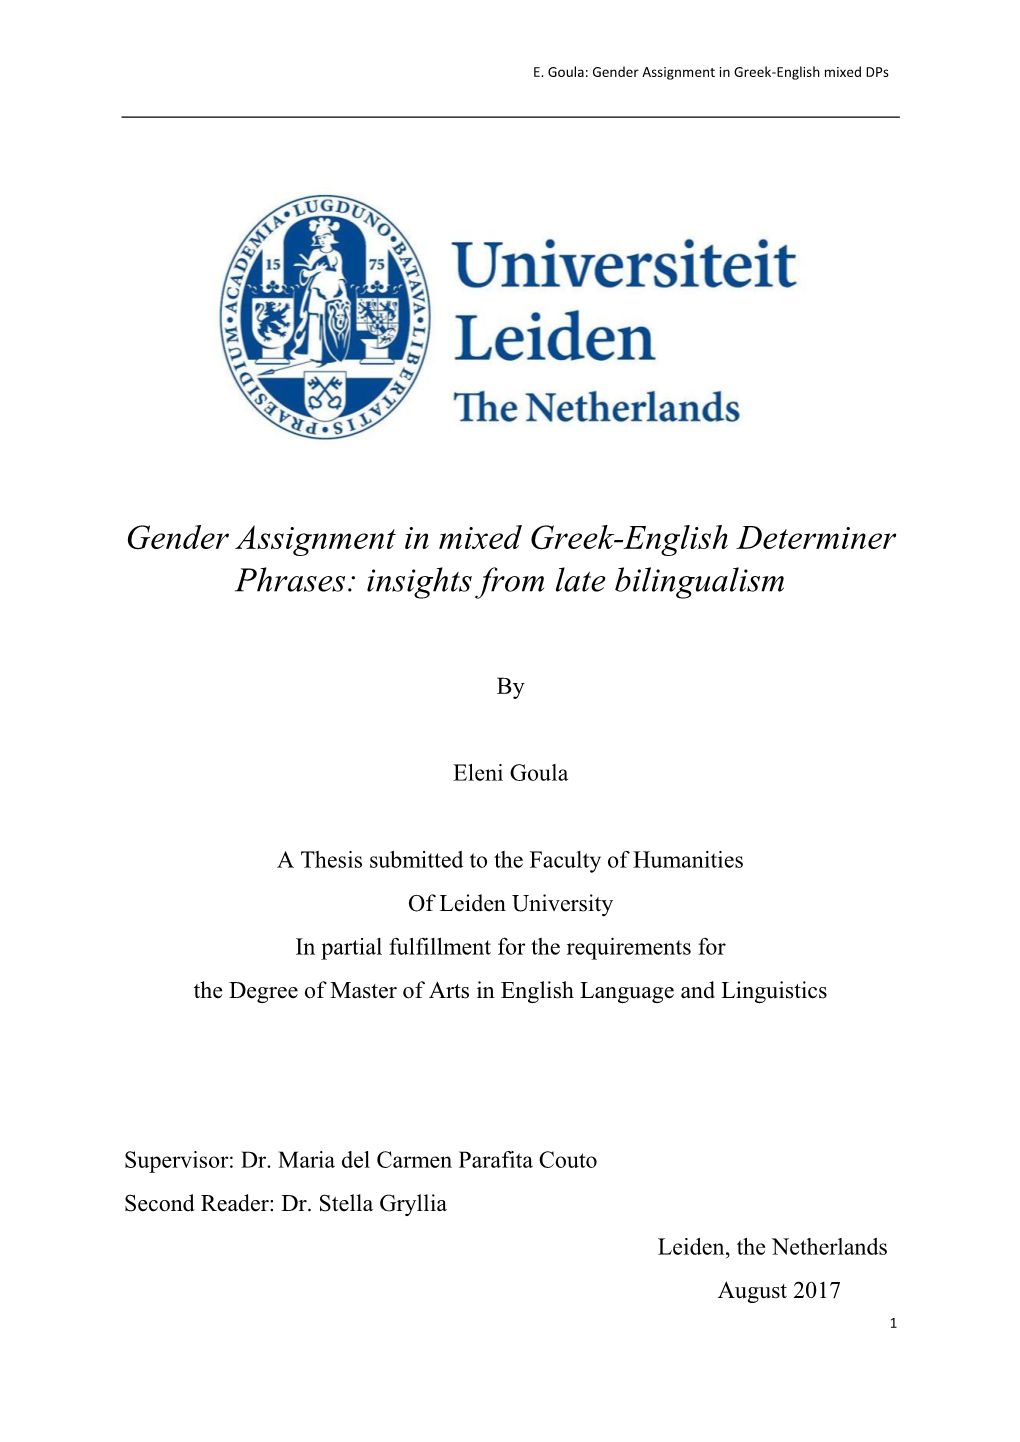 Gender Assignment in Mixed Greek-English Determiner Phrases: Insights from Late Bilingualism